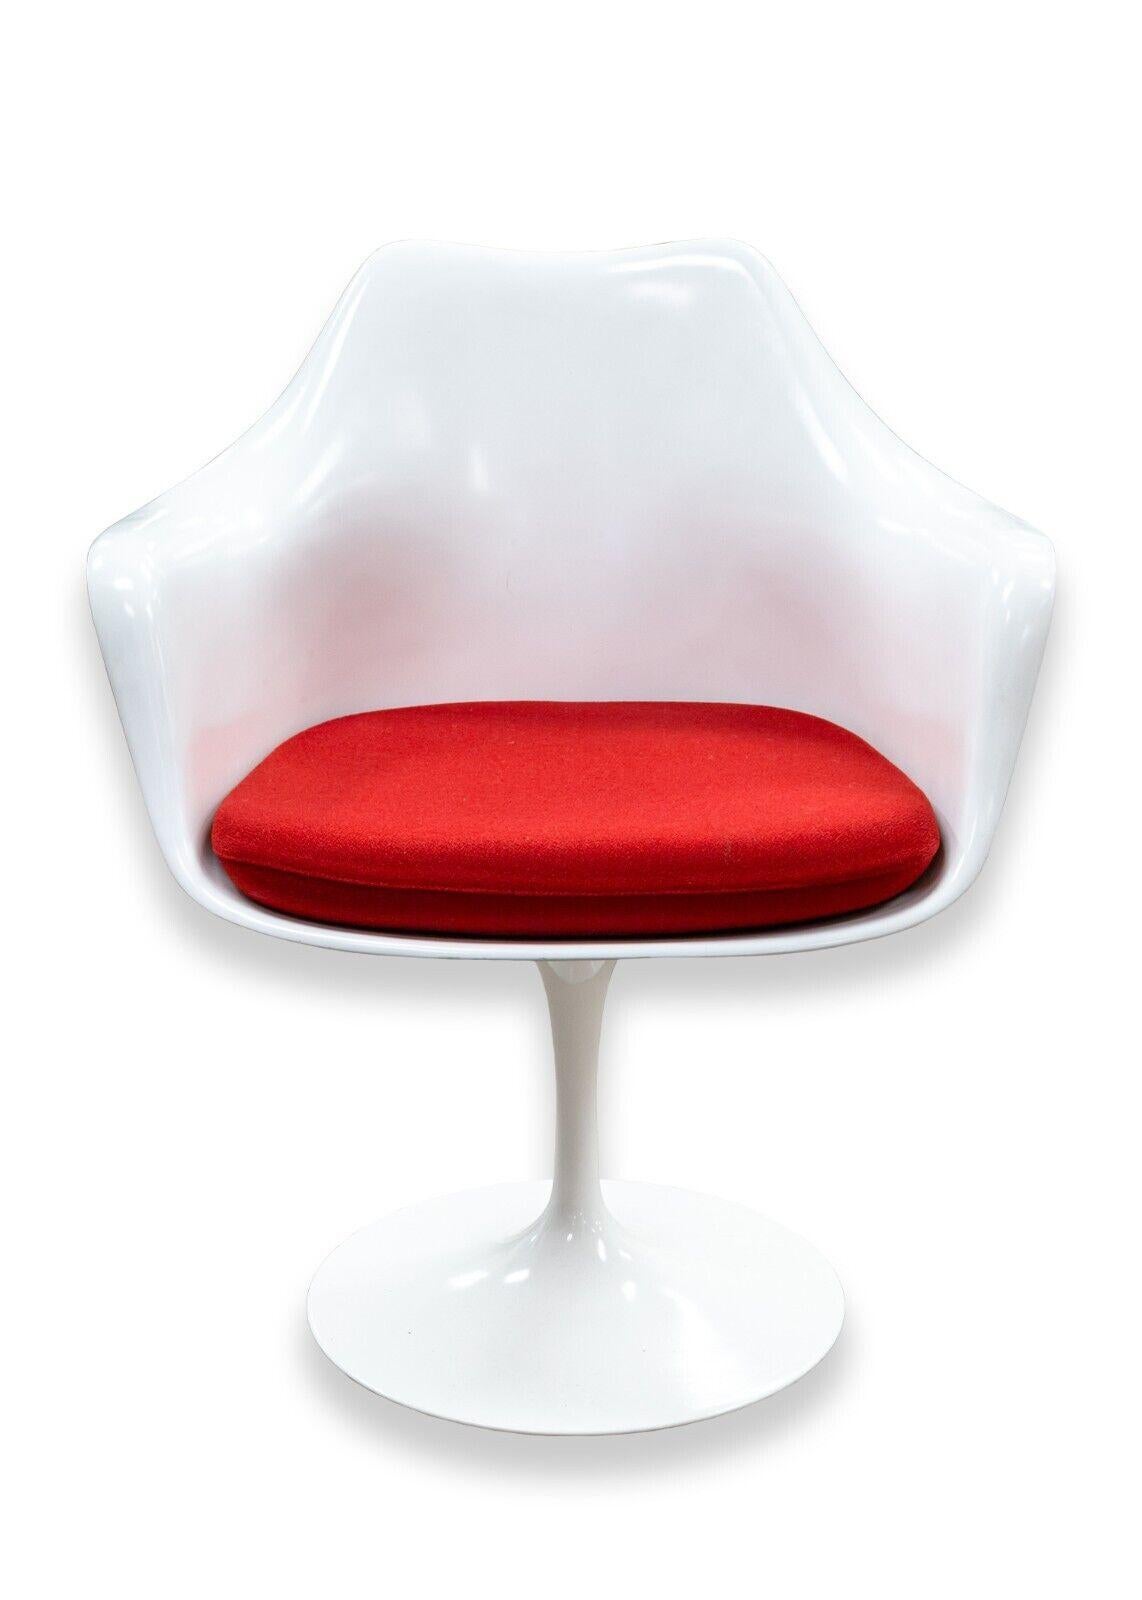 Mid-Century Modern Knoll Saarinen Mid Century Modern White and Red Tulip Dining Chairs 2 Arm 4 Side